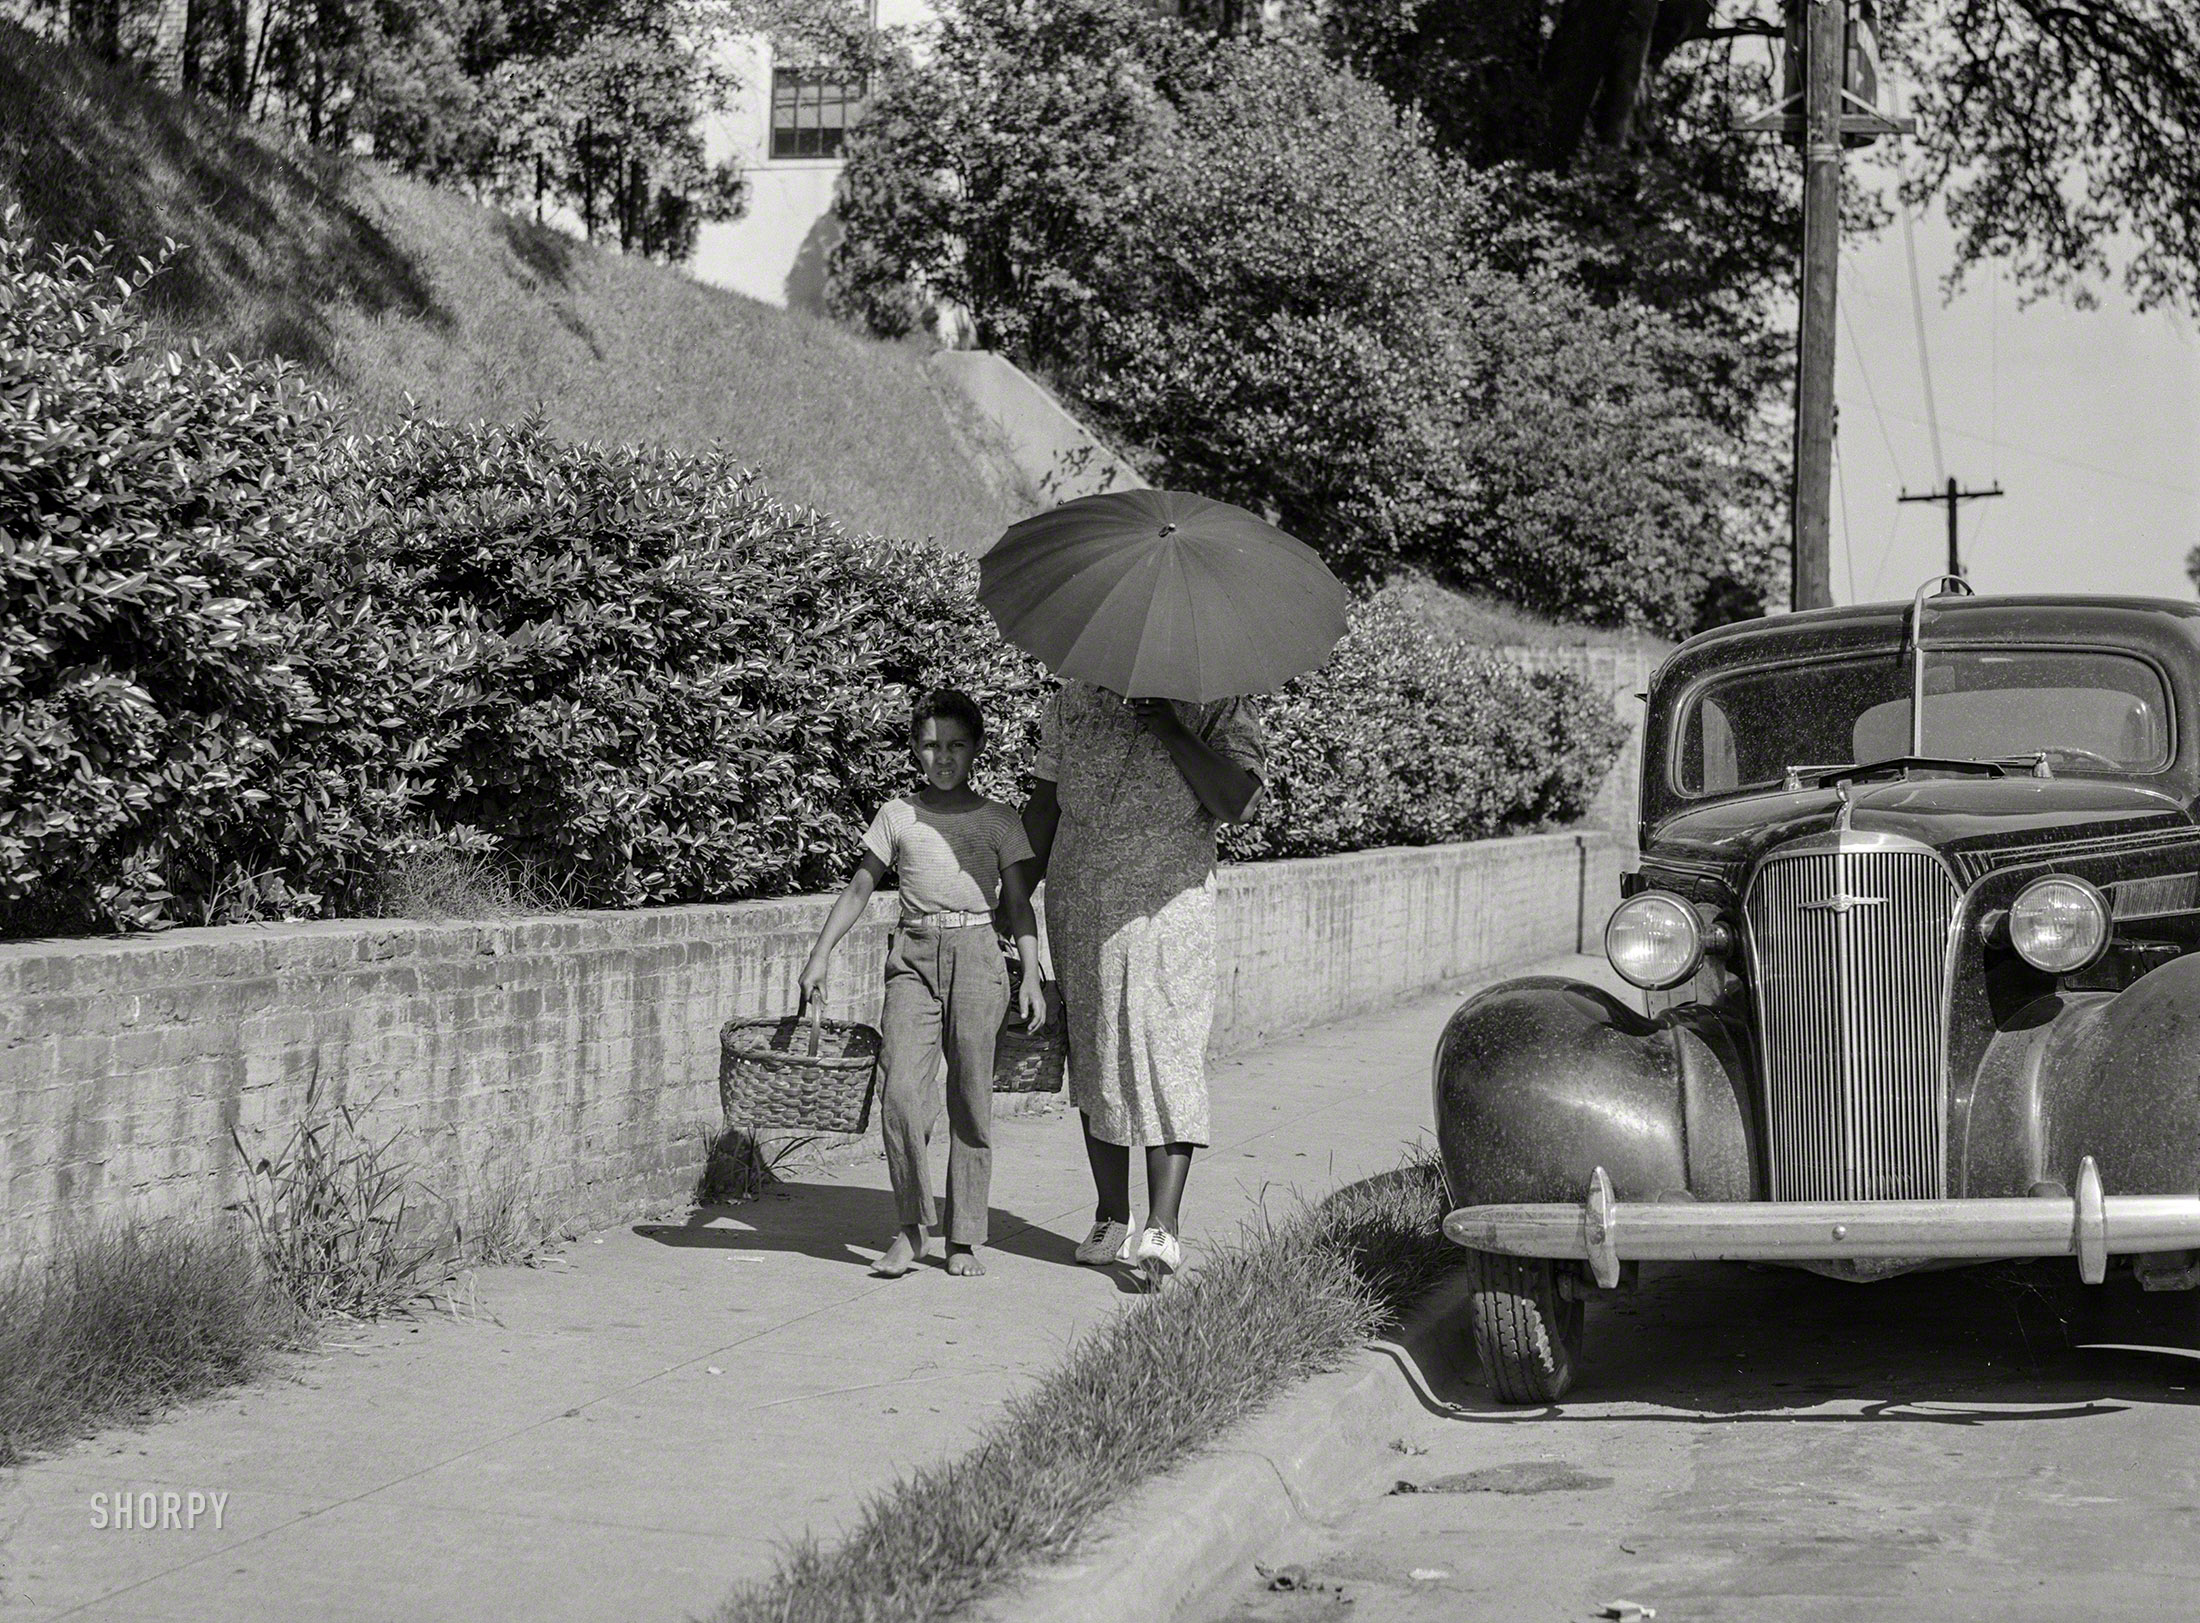 August 1940. "Street scene in Natchez, Mississippi." Medium format acetate negative by Marion Post Wolcott for the Farm Security Administration. View full size.